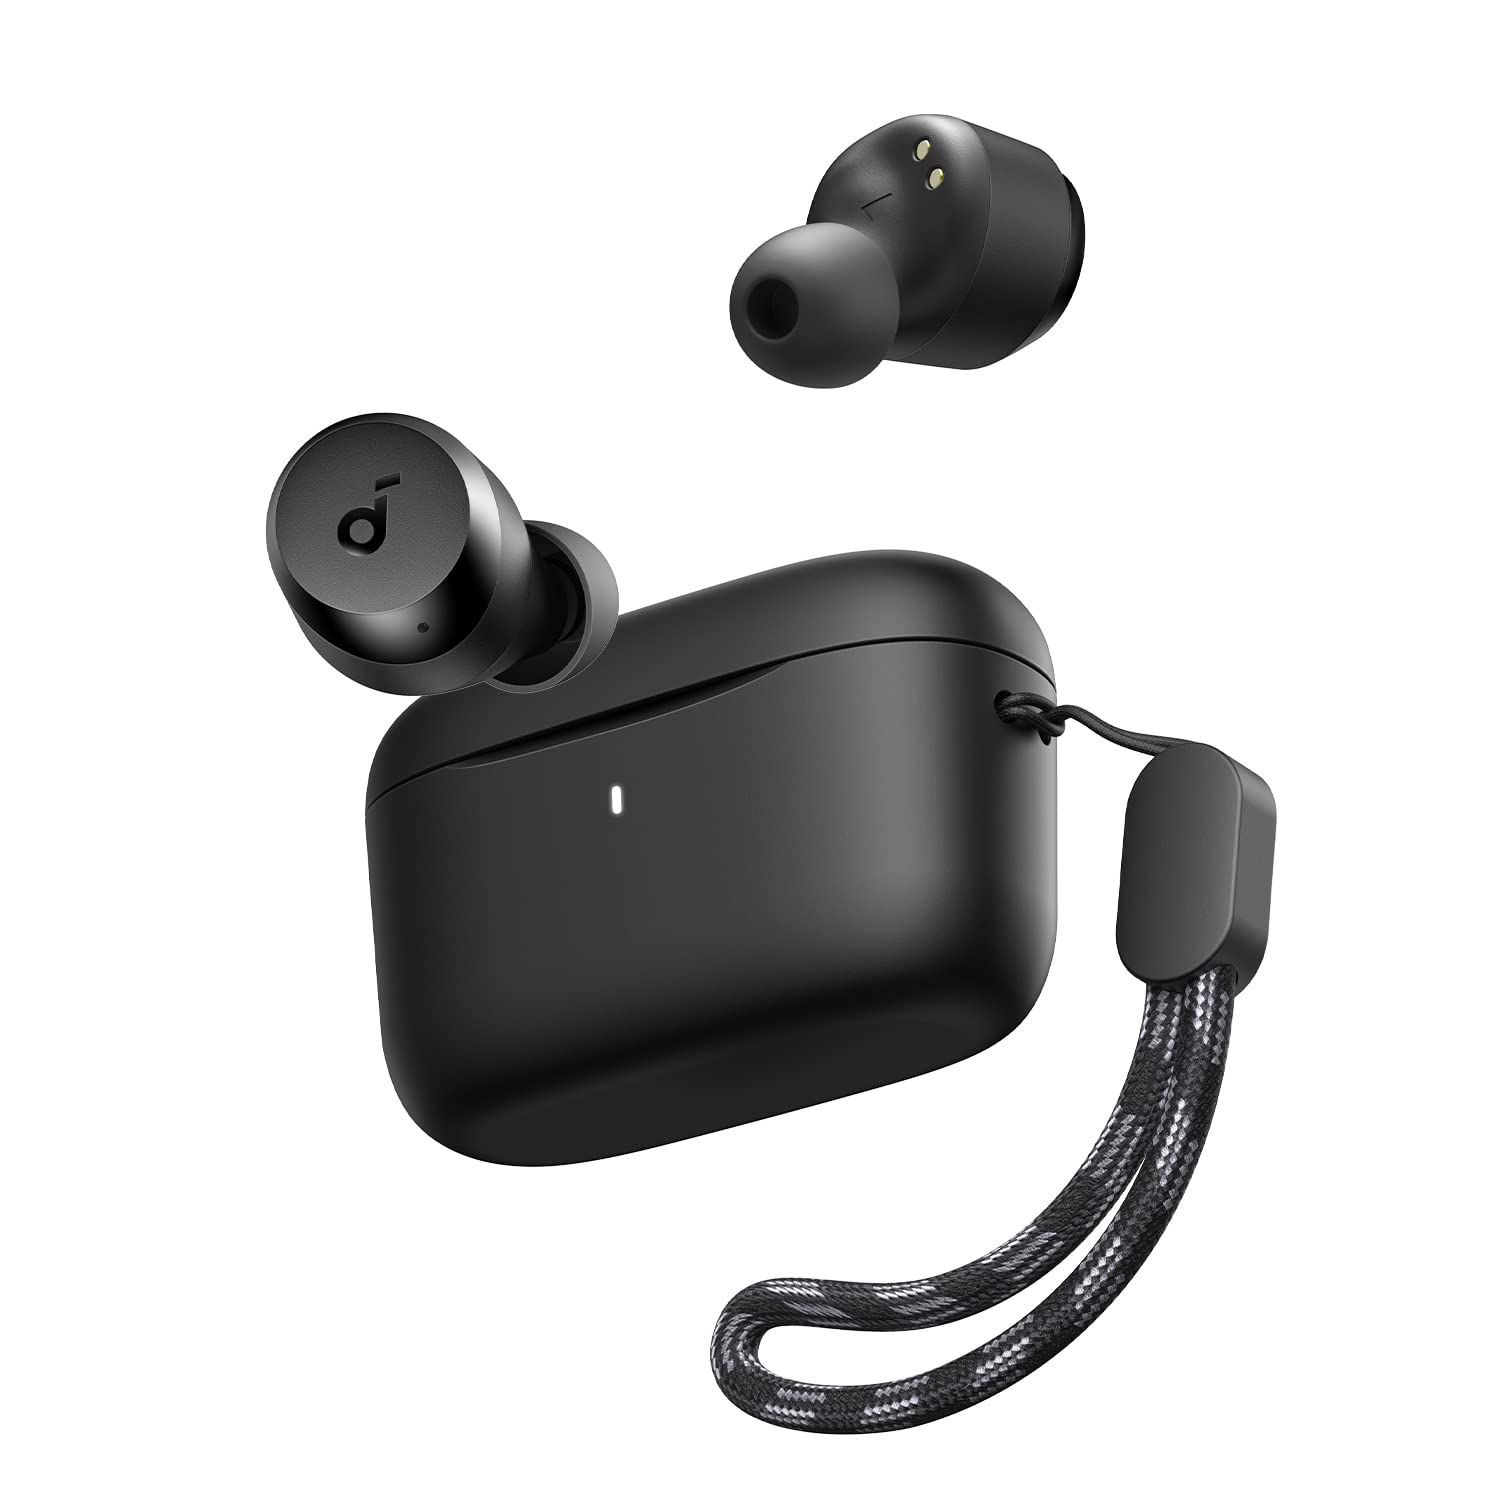 Anker Soundcore A20i TWS Earbuds